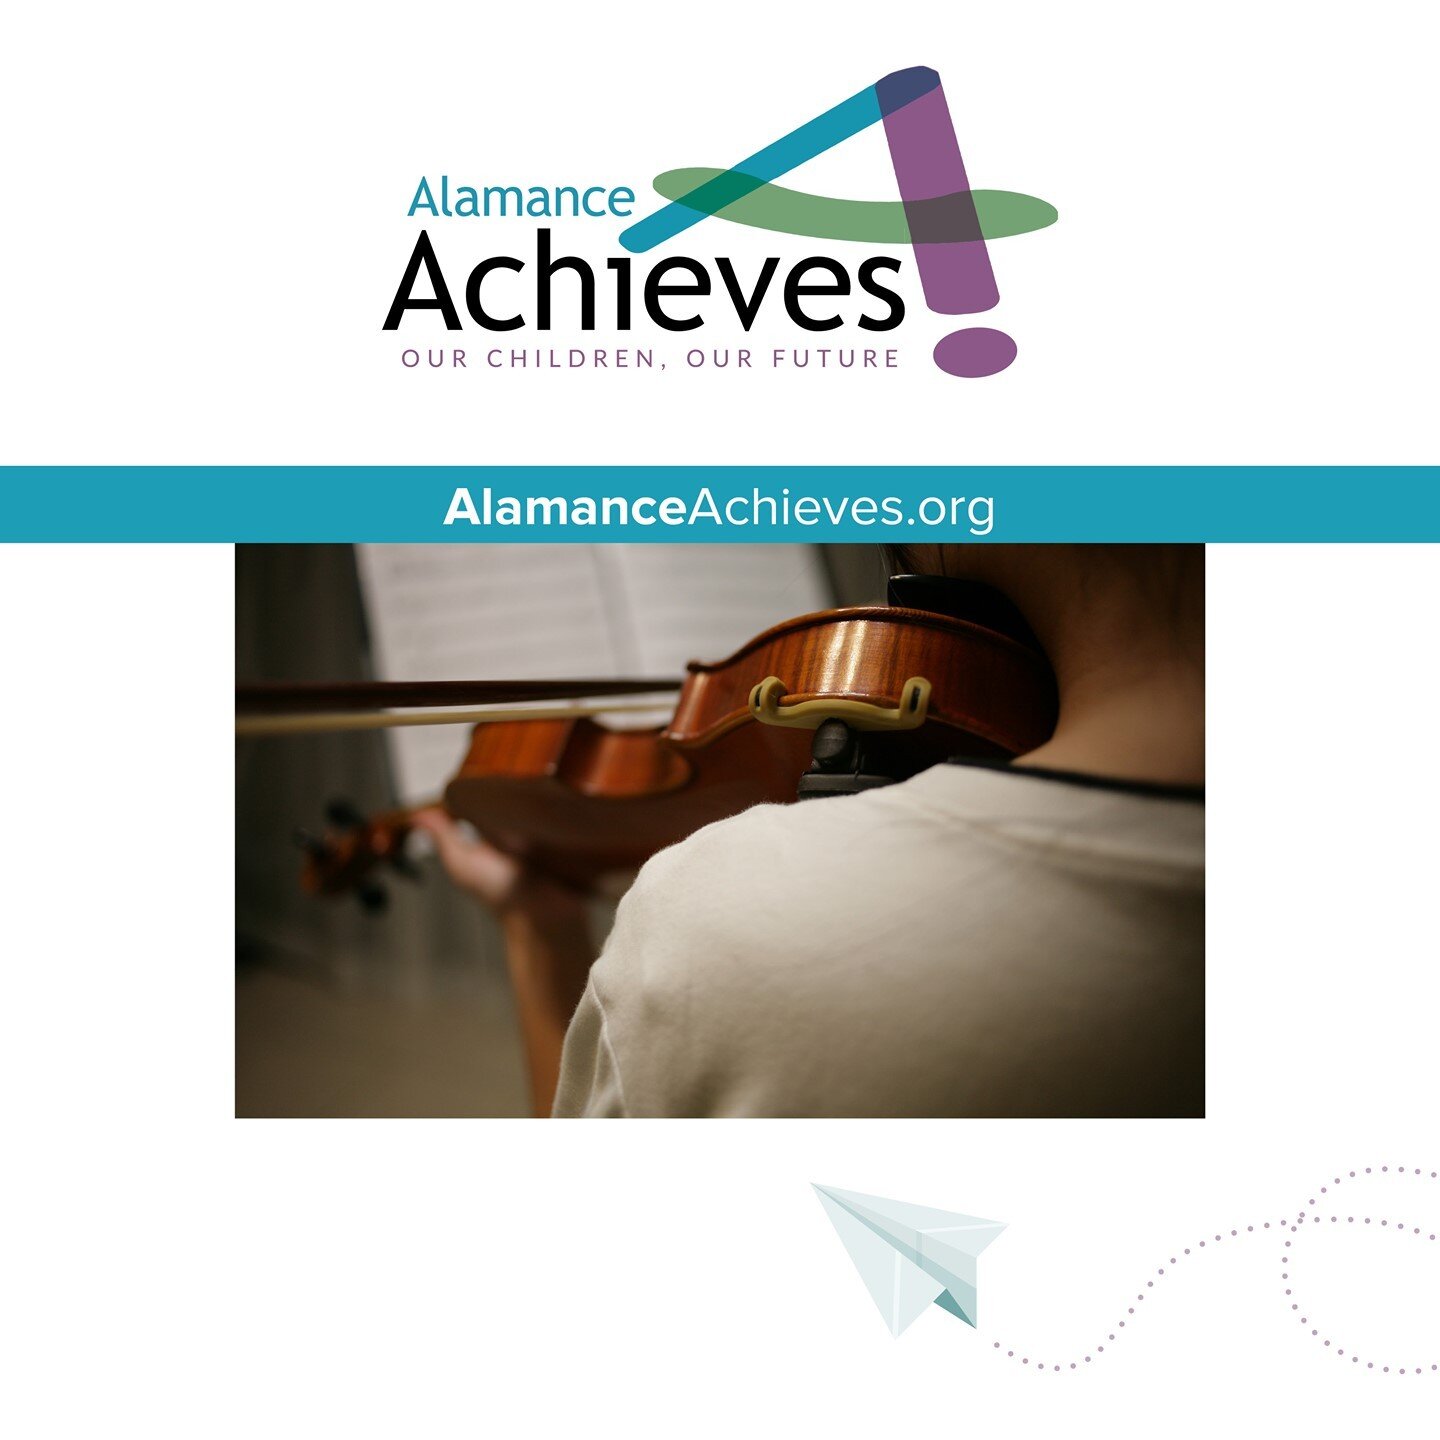 Partner Spotlight: Learn more about how The Young Musicians of Alamance (YMA) has been focused on breaking down barriers that keep children of low socio-economic means from fully exploring the world of music, today on the blog.
.
.
.
.
.
#classicalmu